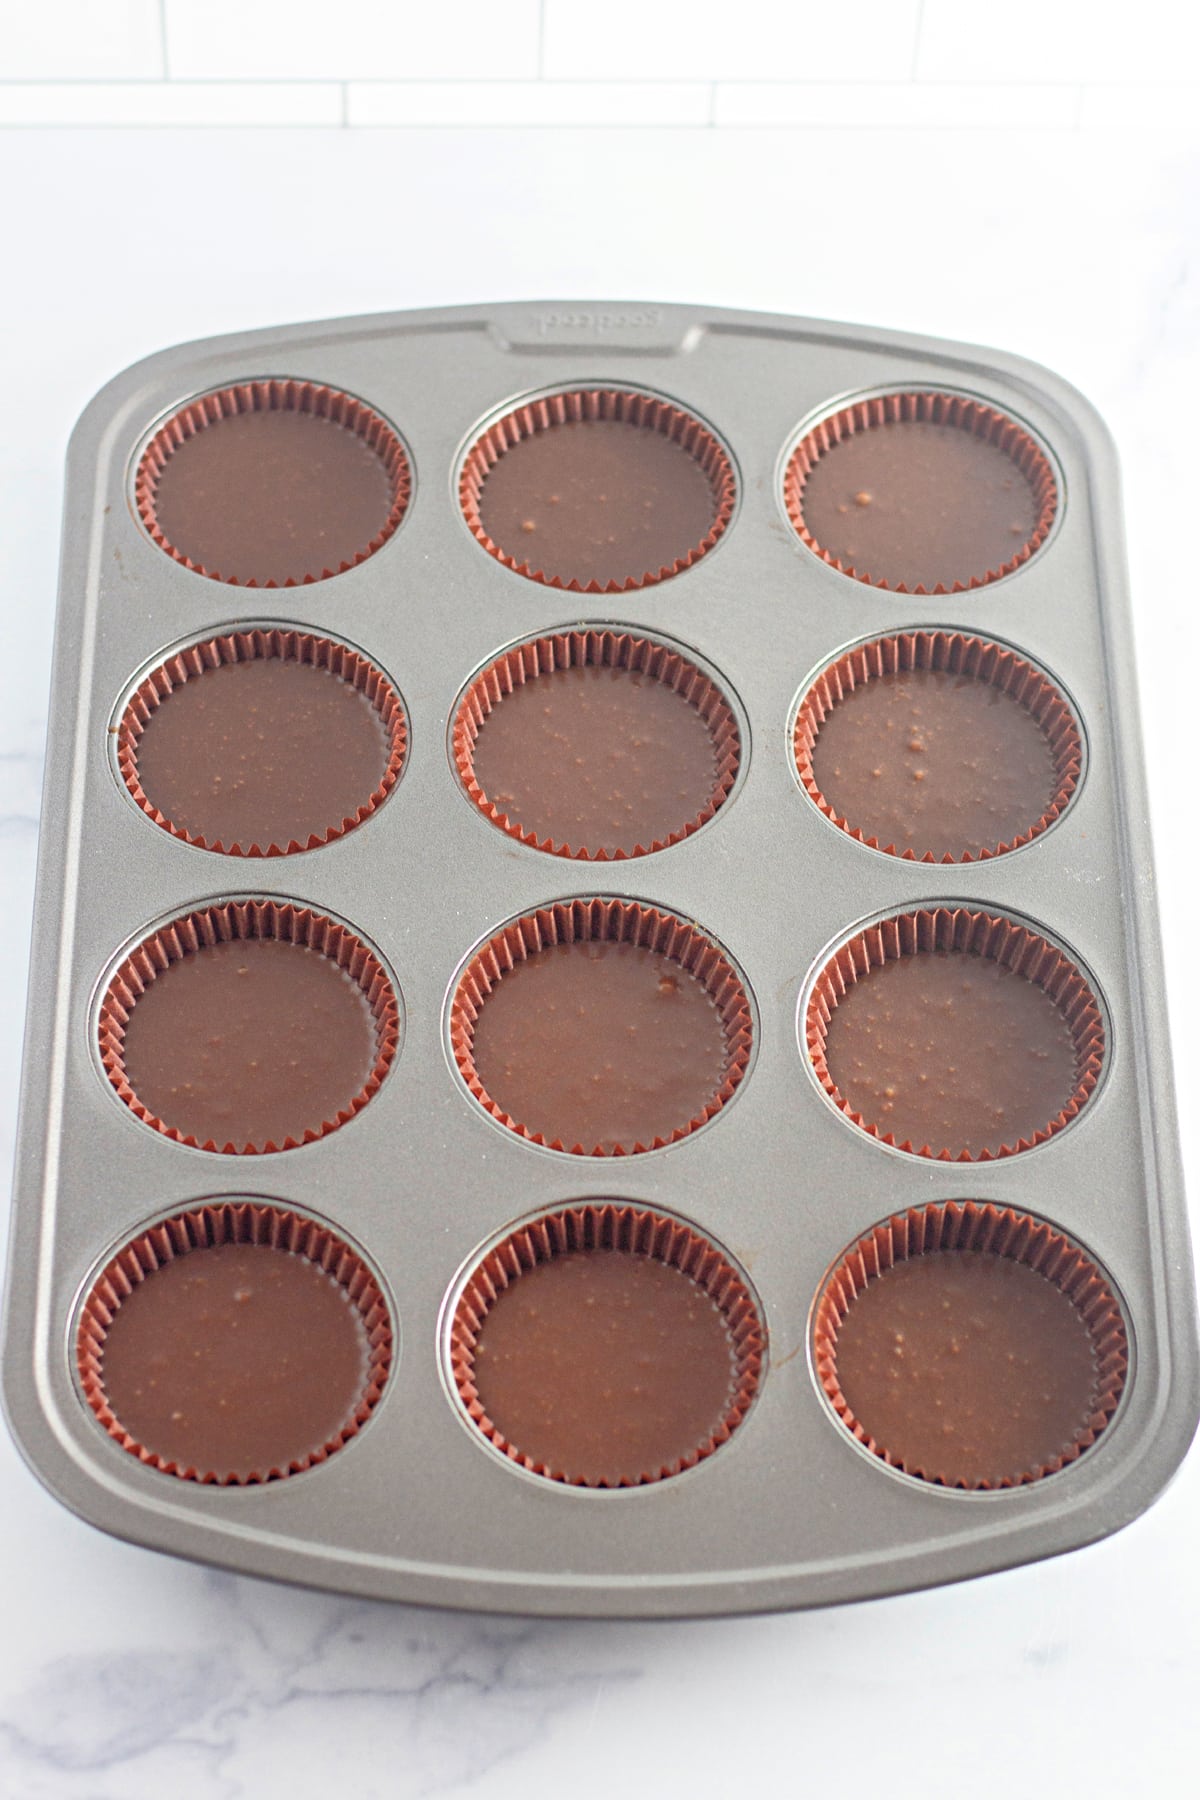 chocolate cupcakes in pan ready to bake